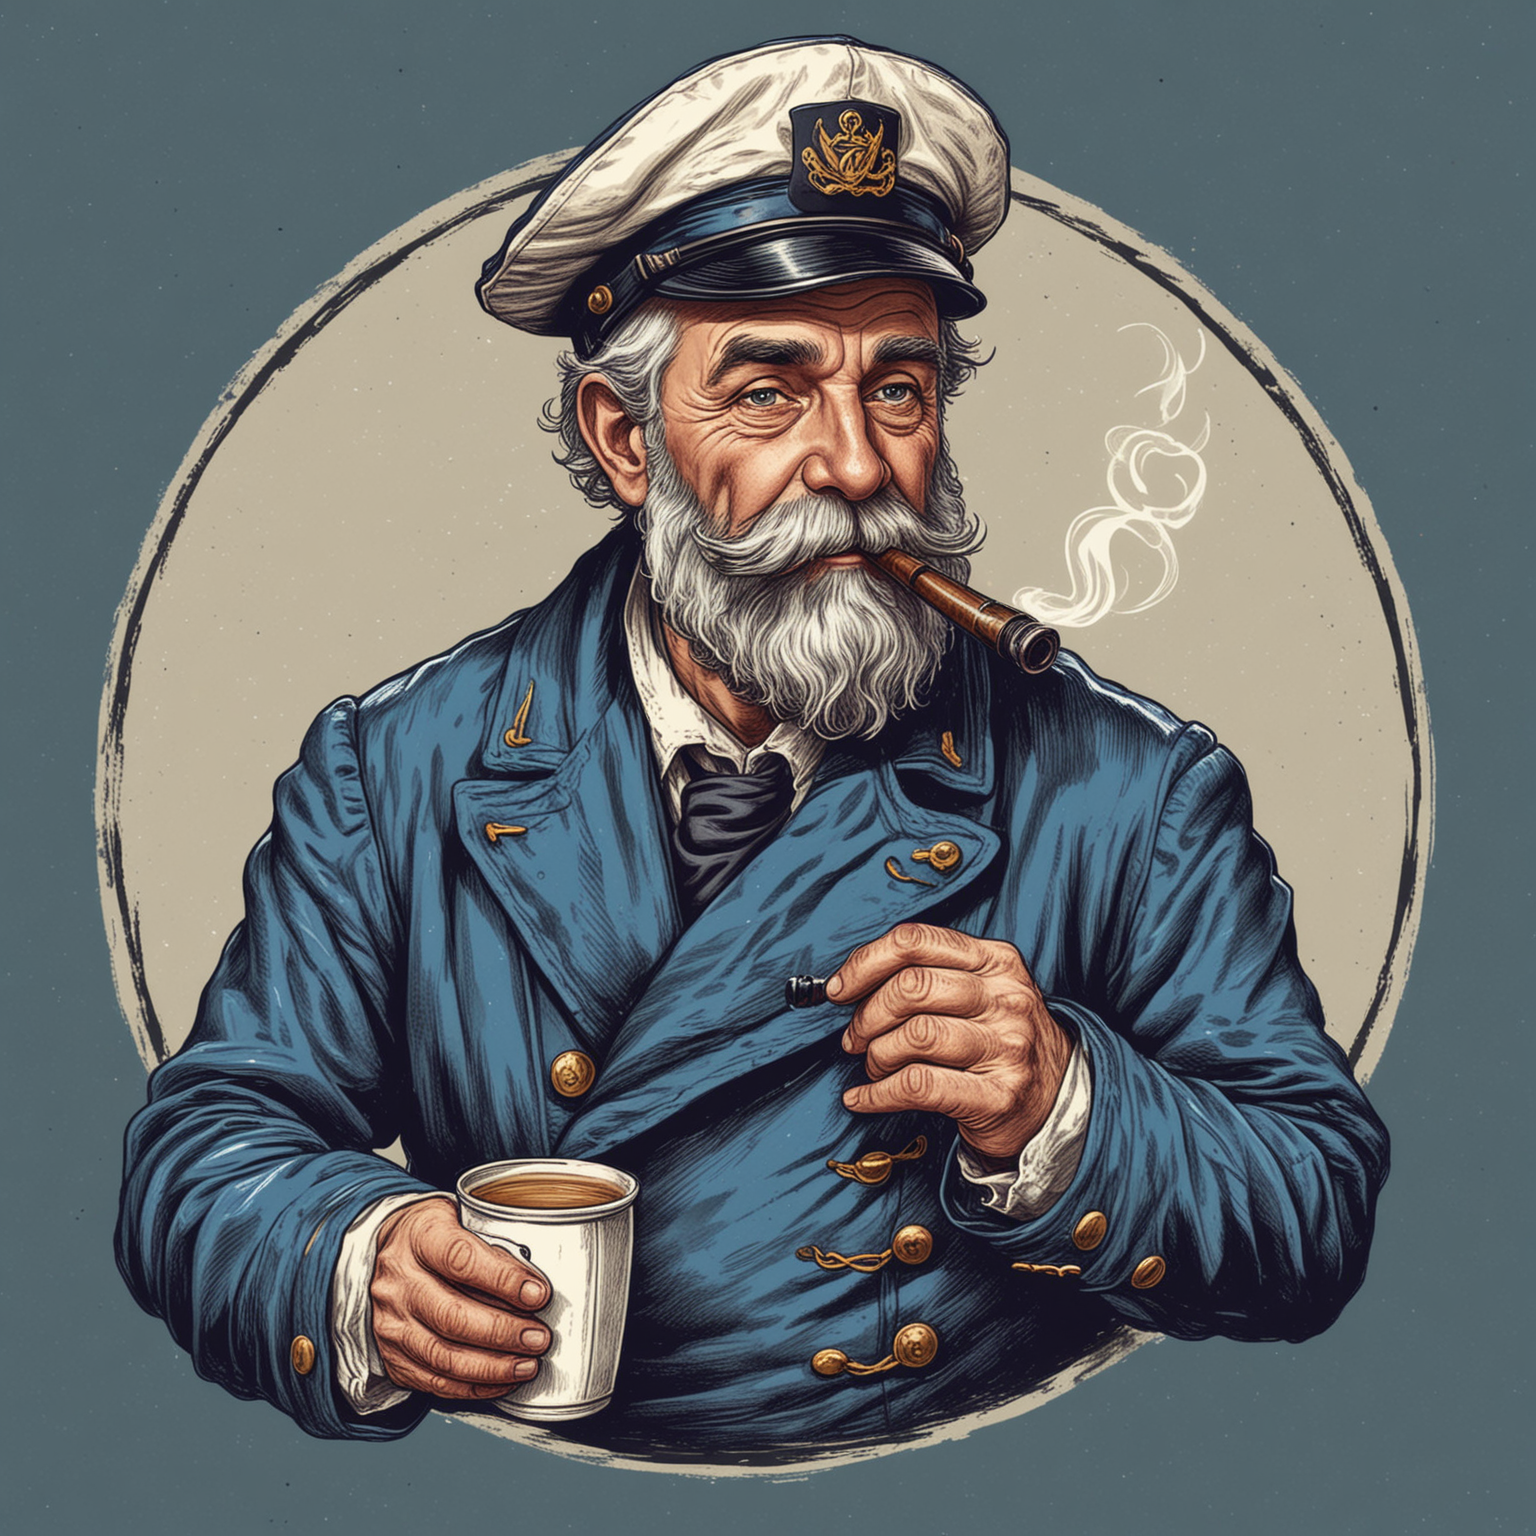 logo style image of an old school sailor from the 19th century drinking a cup of coffee.  wearing a blue  captains jacket and hat with a beard, smoking a pipe, in a hand drawn style with no background, logo style
